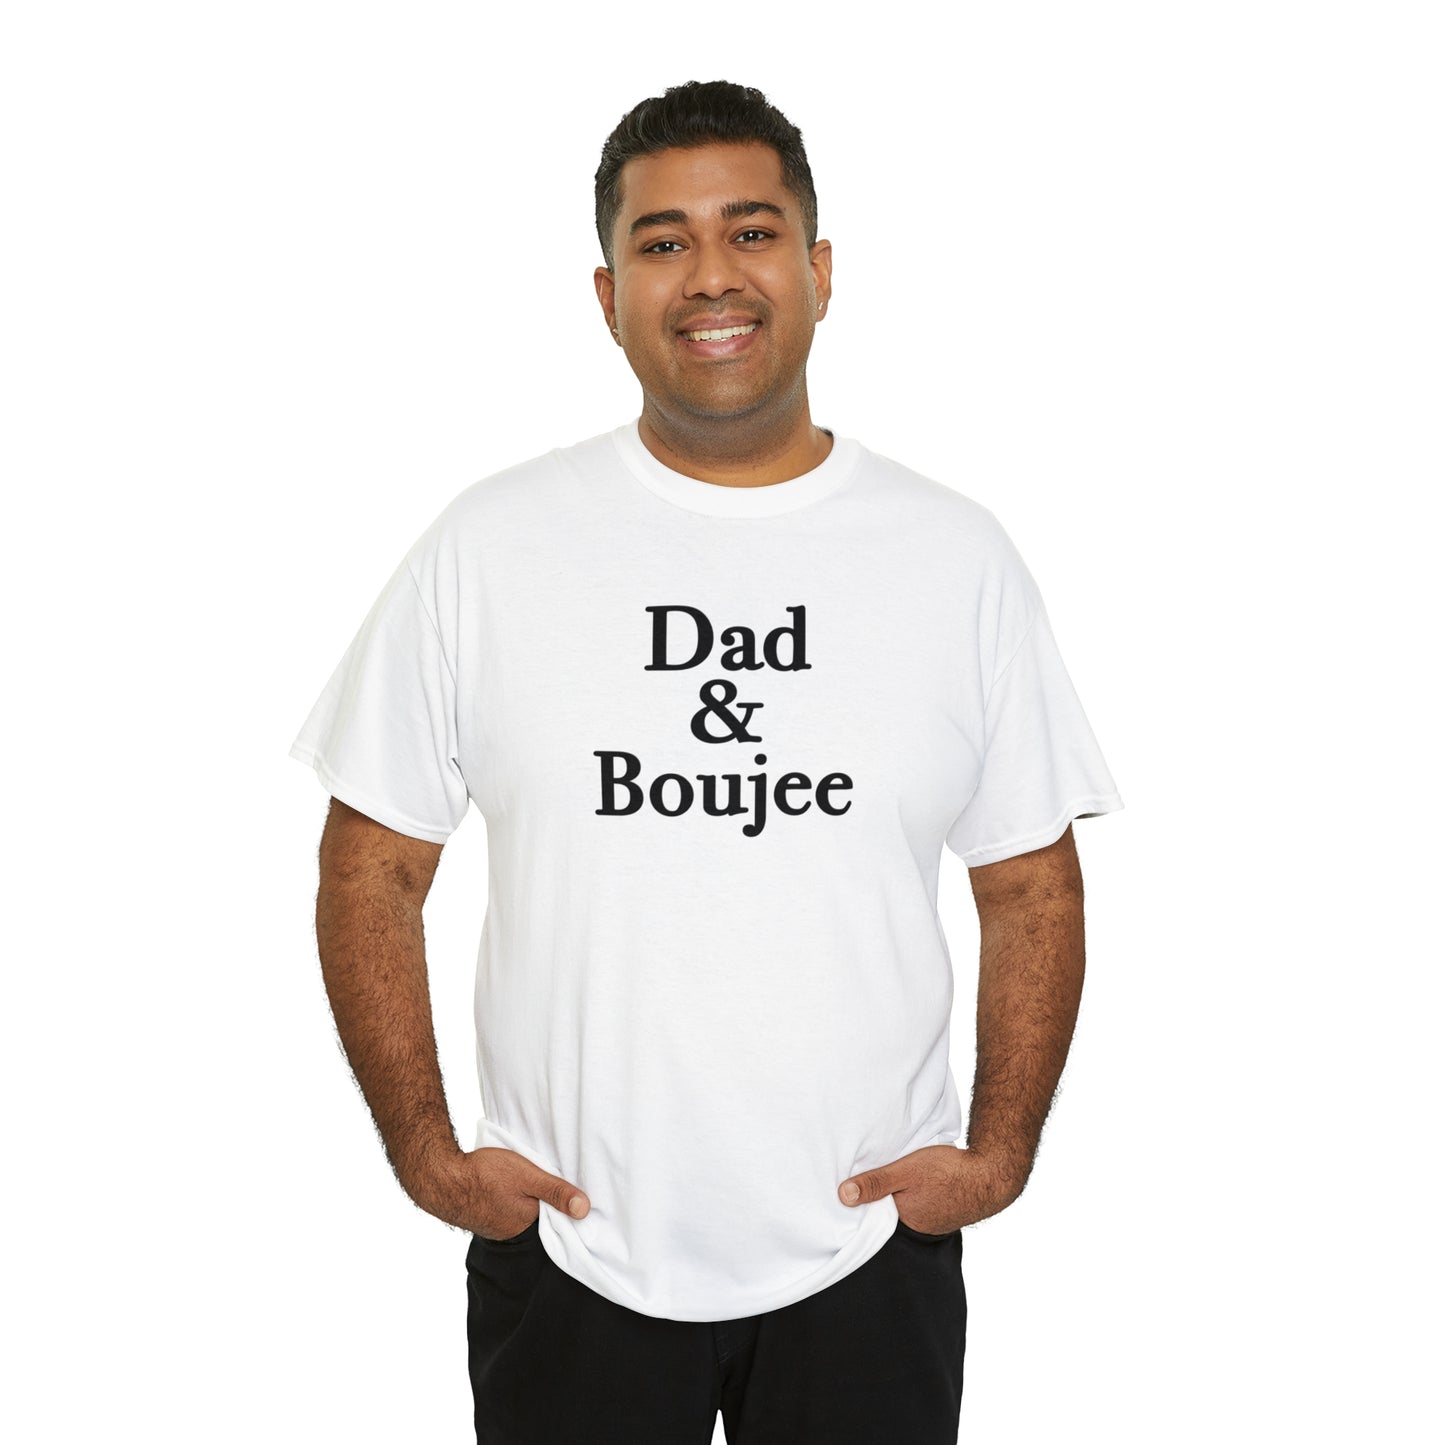 Dad & Boujee Shirt for Dad Great Father's day gift for Dad, a Dad and Boujee T-Shirt